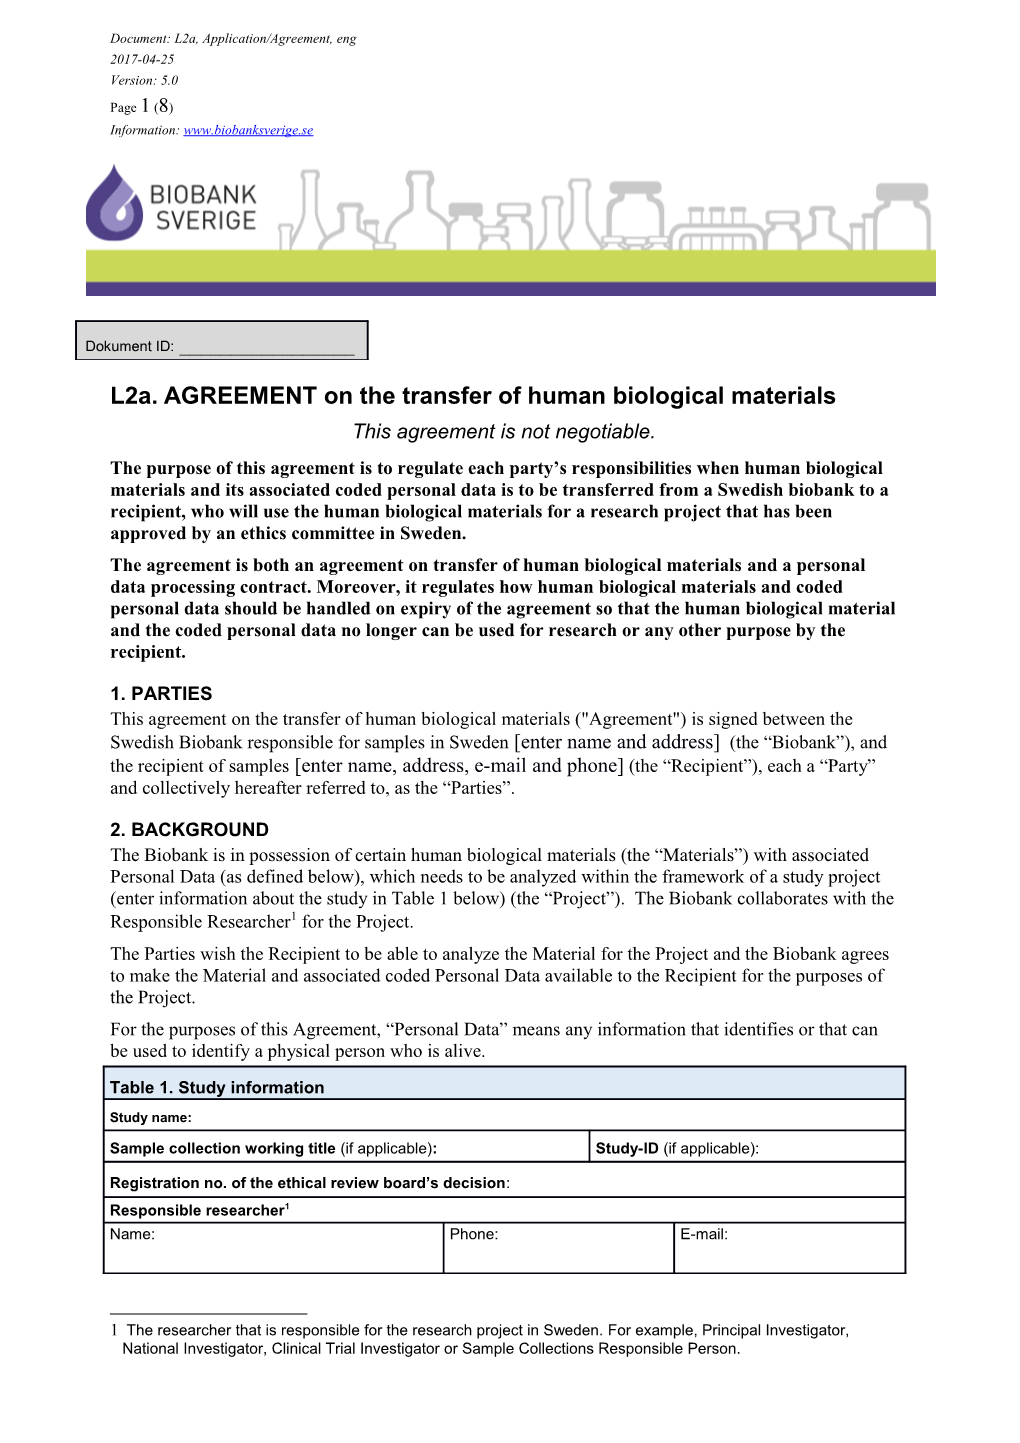 L2a. AGREEMENT on the Transfer of Human Biological Materials